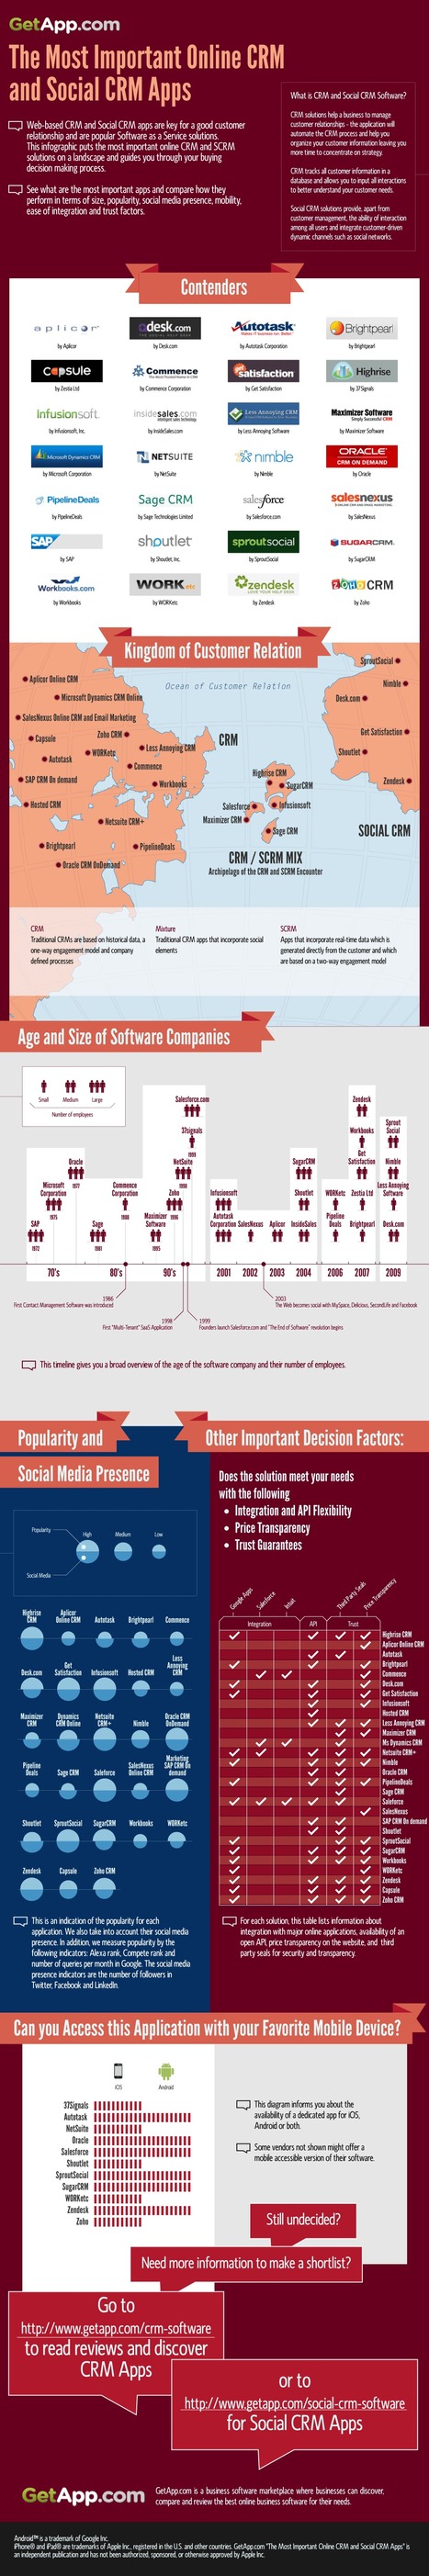 Does Social Customer Relationship Management (CRM) Exist? Maybe [Infographic] | Supply chain News and trends | Scoop.it